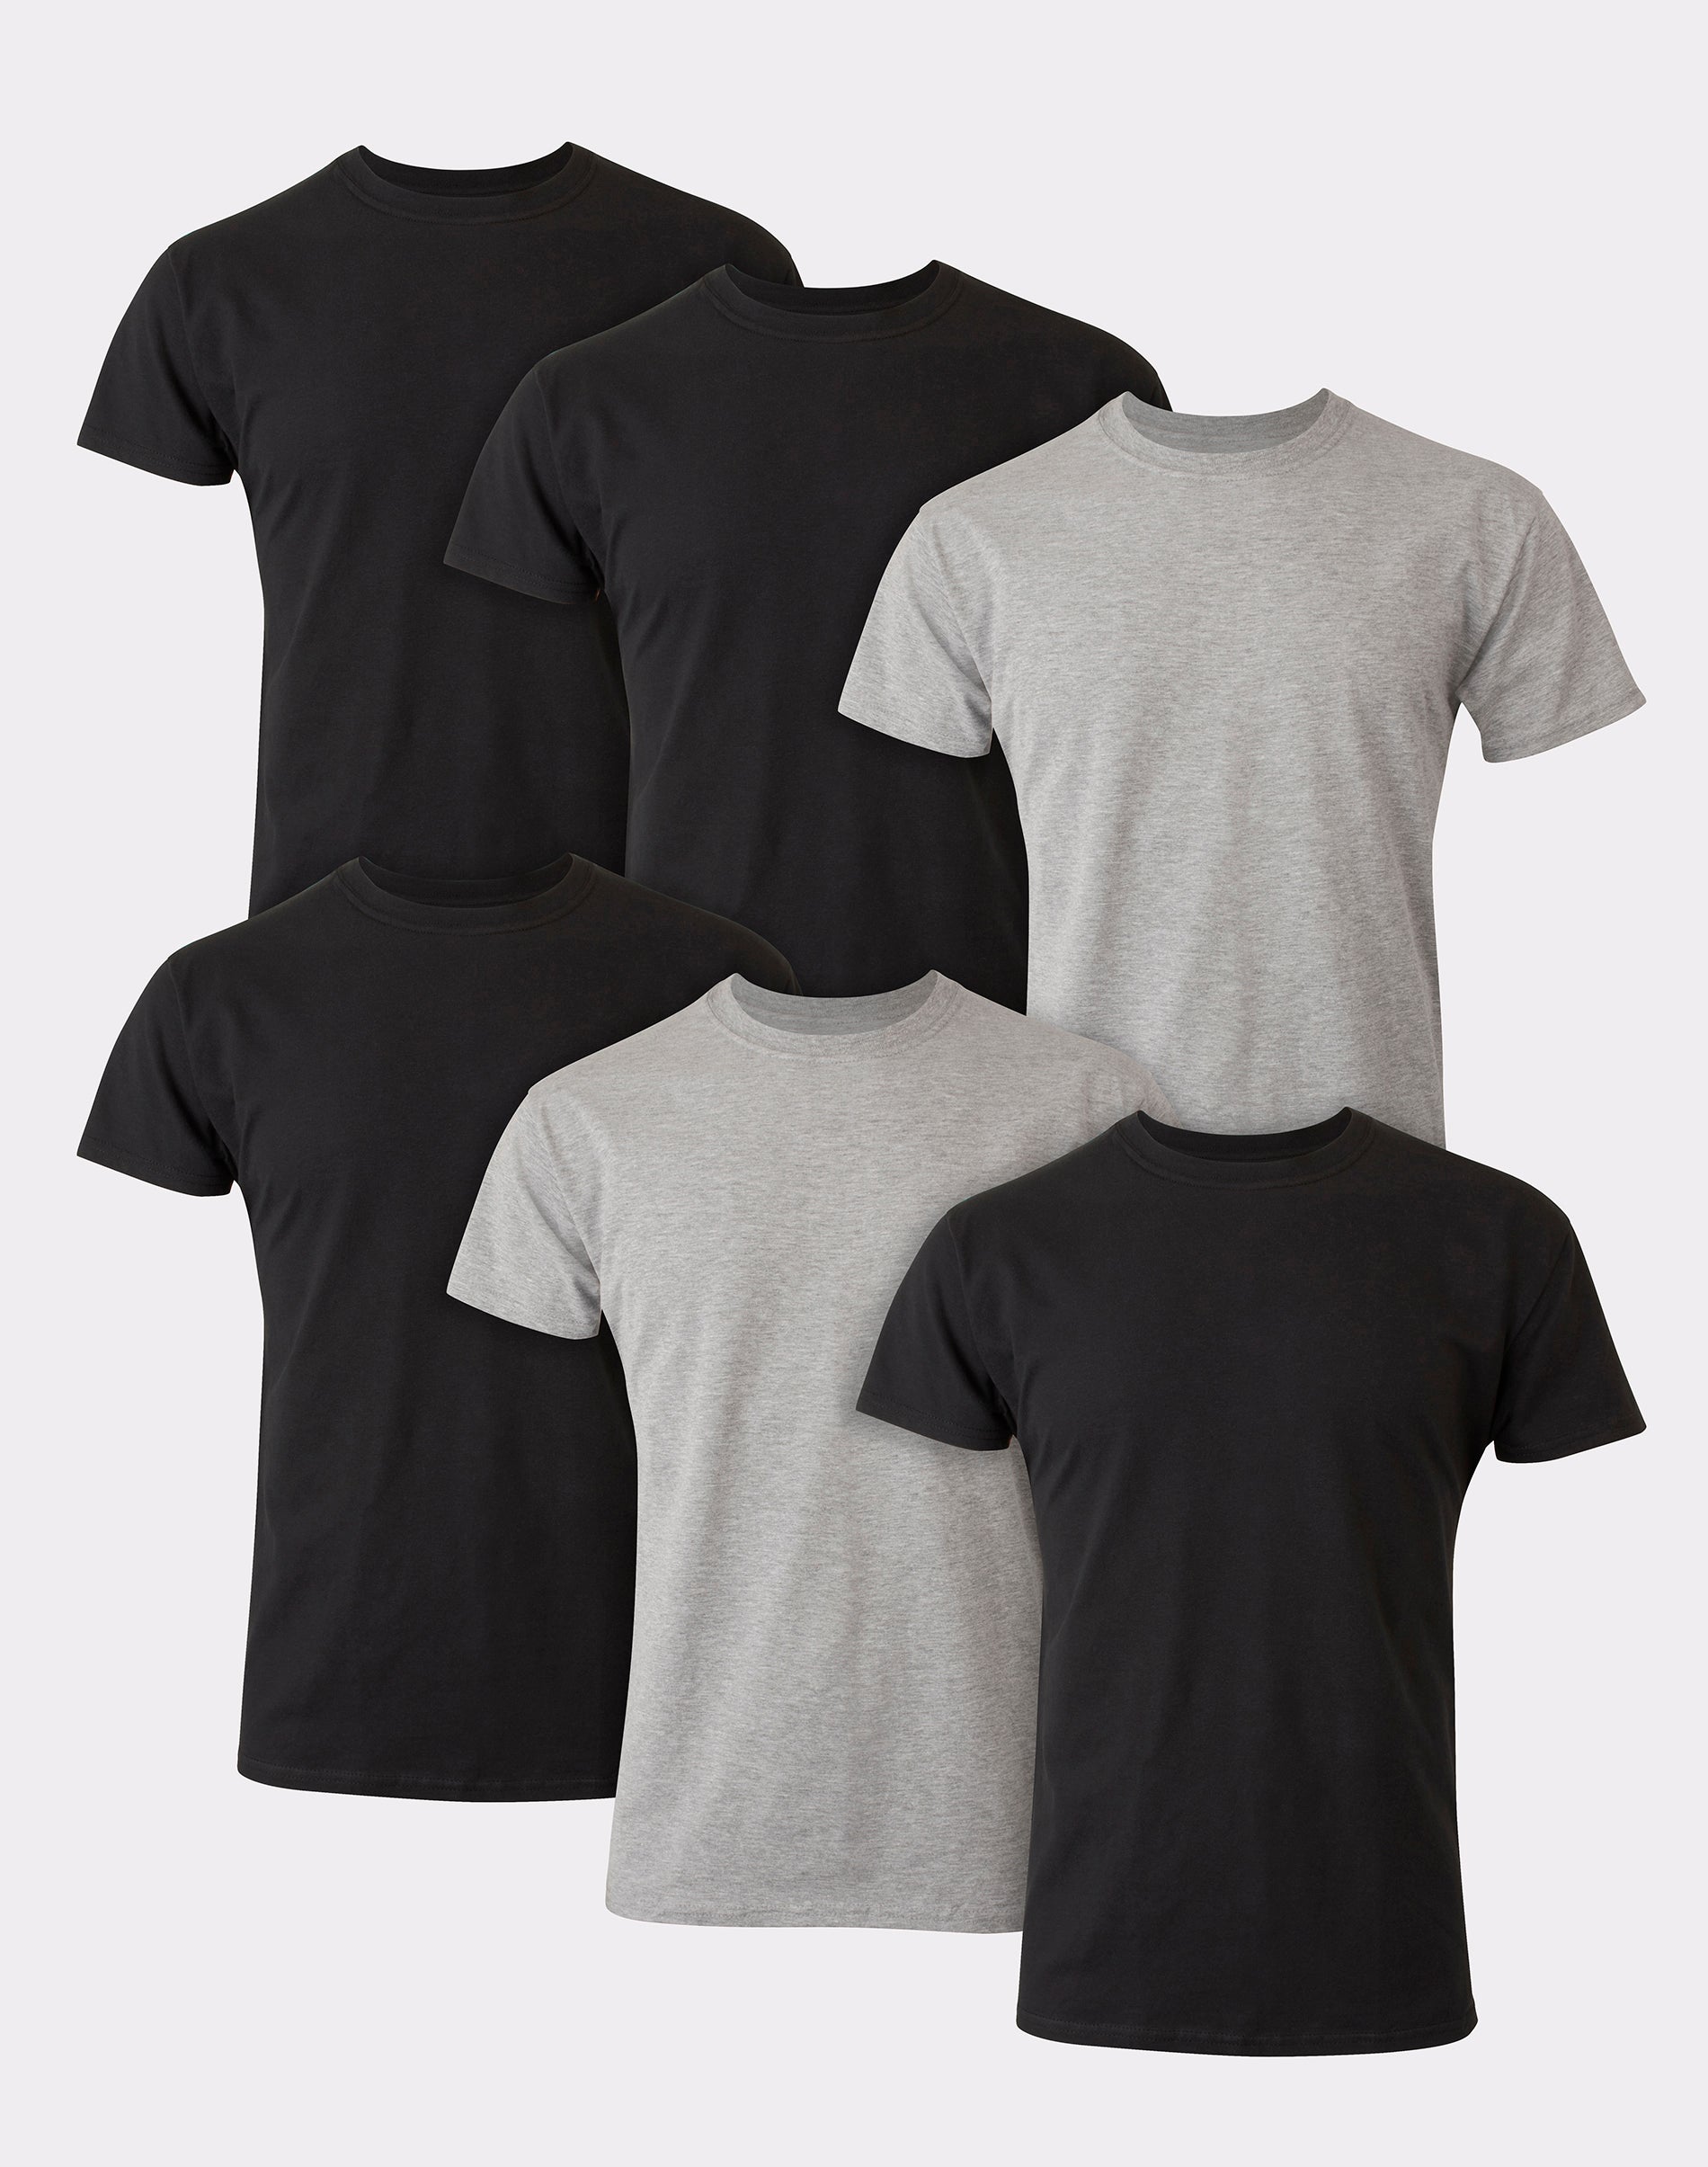 Hanes Ultimate® Men's Soft and Breathable Crewneck Undershirt 6-Pack